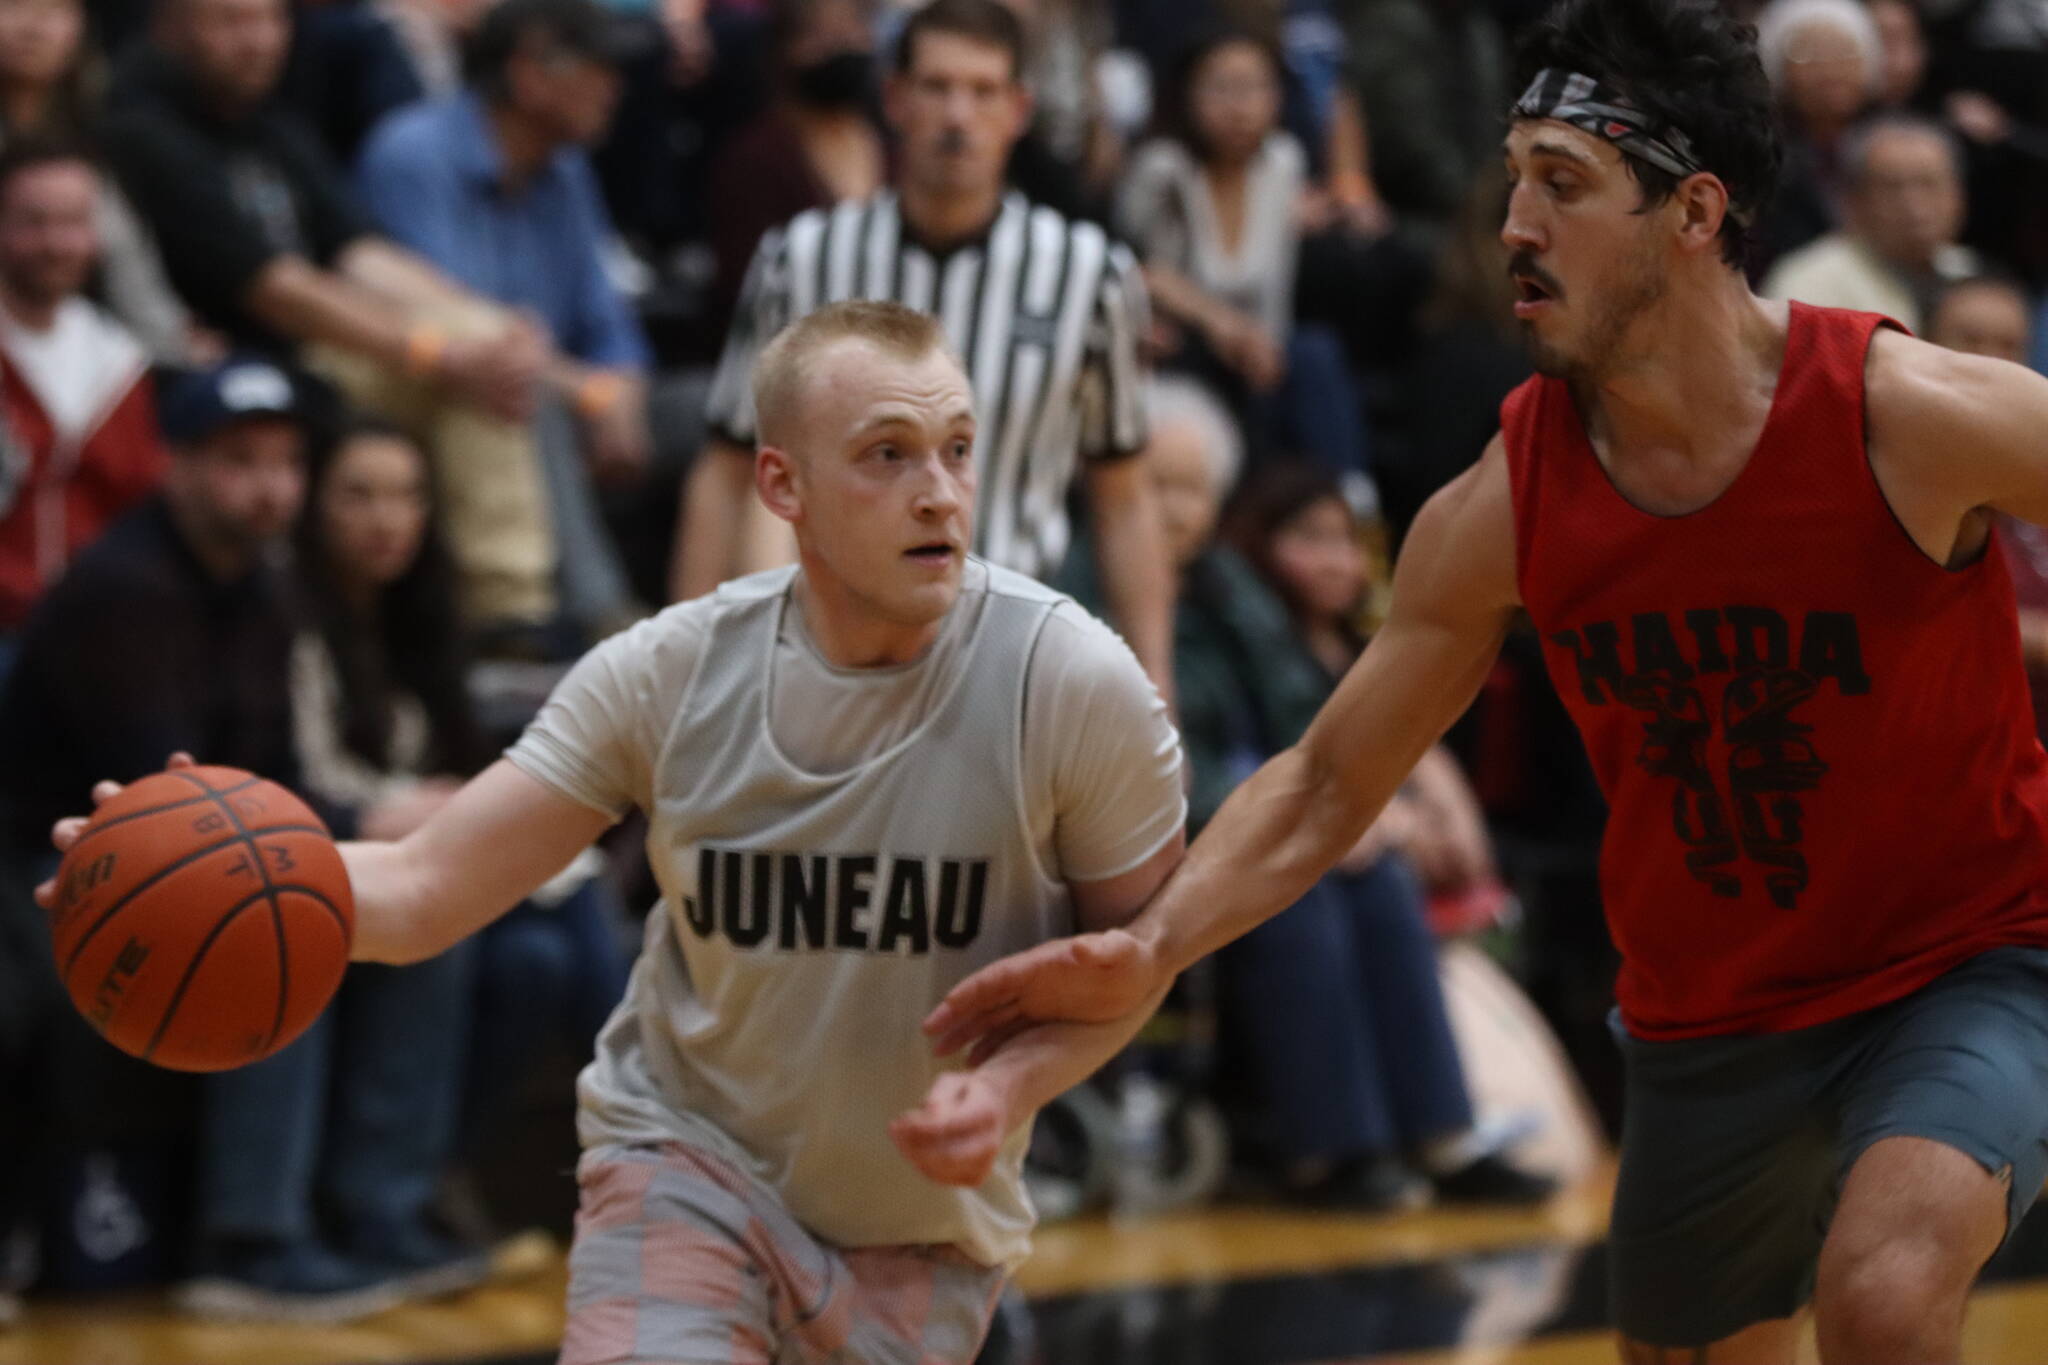 Juneau’s Chase Saviers looks for an open pass during Saturday’s championship game against Hydaburg in the Gold Medal Basketball Tournament. Saviers finished the game with 12 points and earned all-tournament honors, as well. (Jonson Kuhn / Juneau Empire)